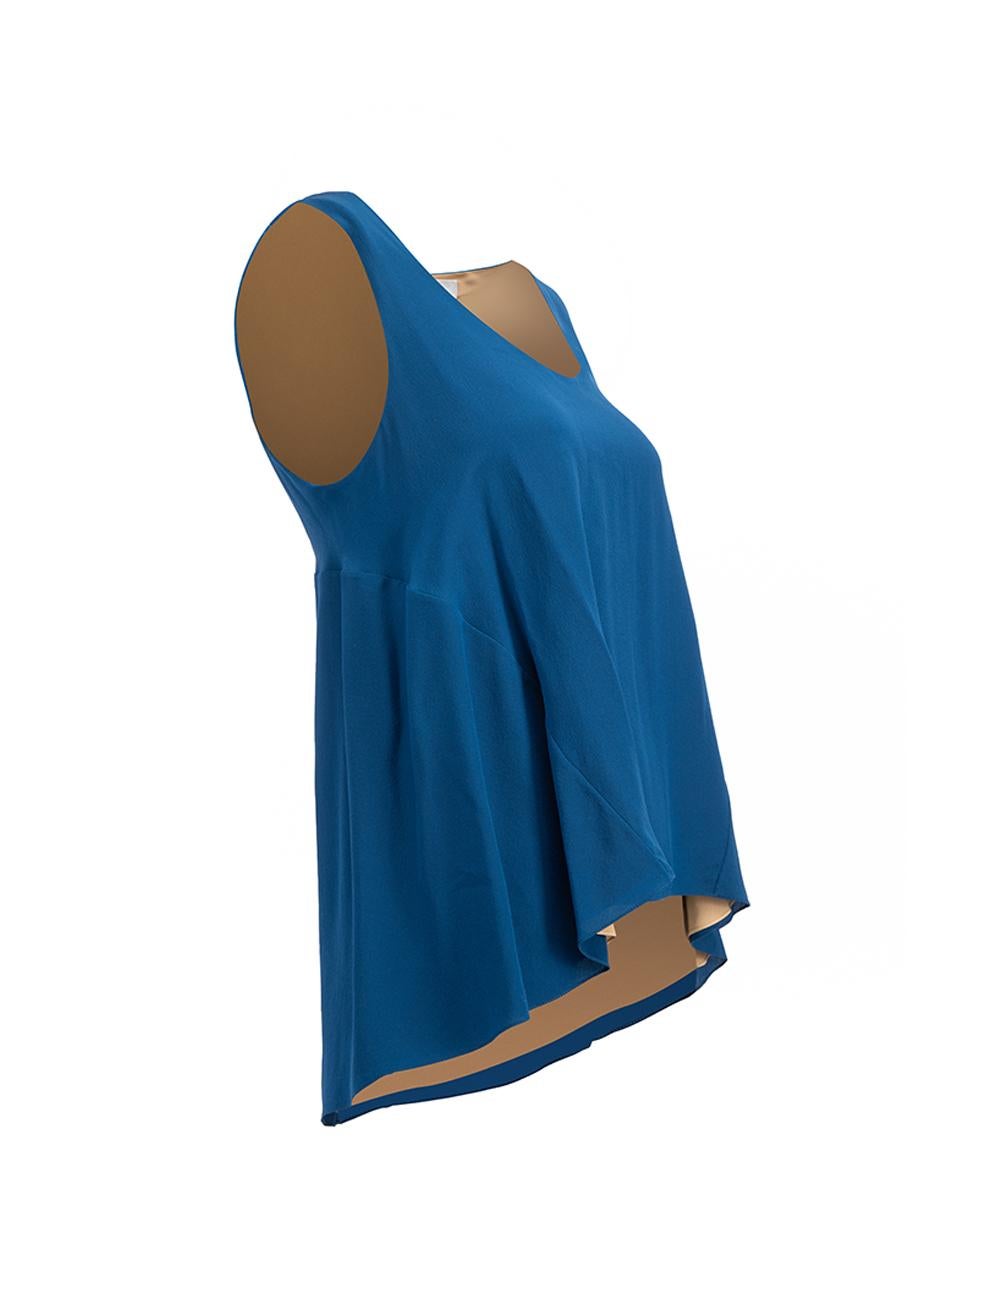 CONDITION is Very good. Hardly any visible wear to blouse is evident. Small stain to the front lining on this used Chloé designer resale item.

Details
Blue
Silk
Sleeveless top
Loose fit
Scoop neckline
High low hemline
Made in